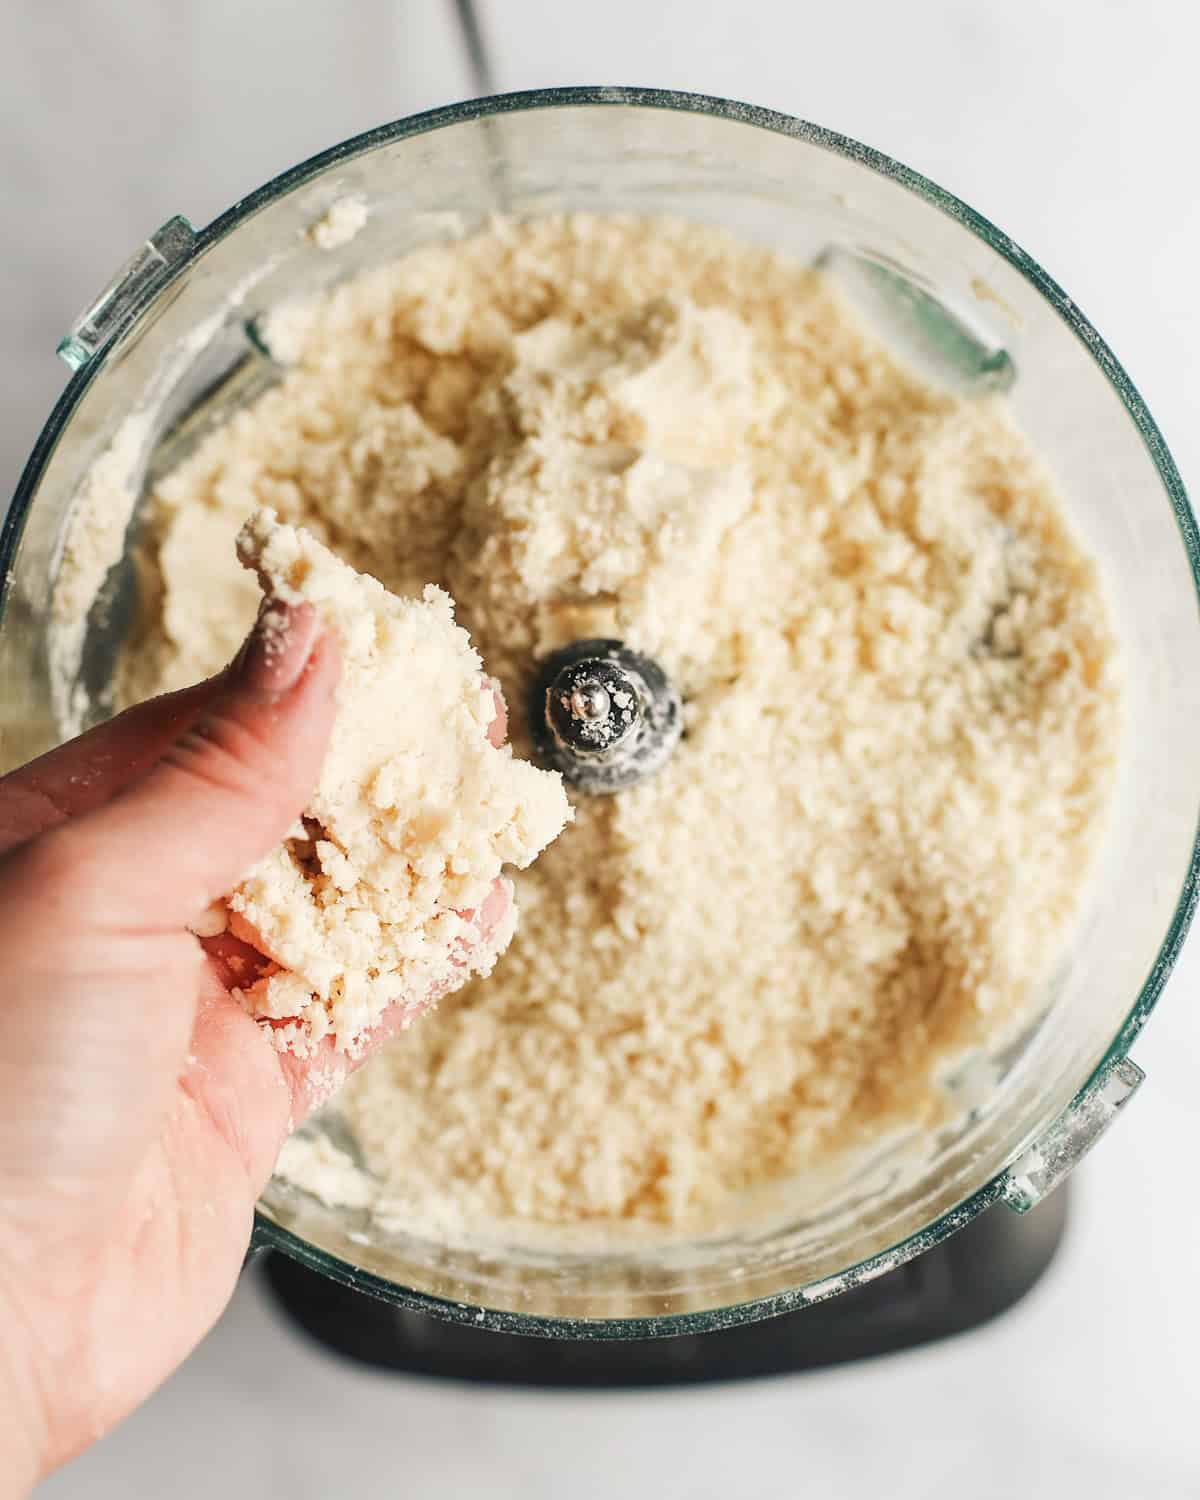 How to Make Peach Pie Crust - dough being pinched together over a food processor